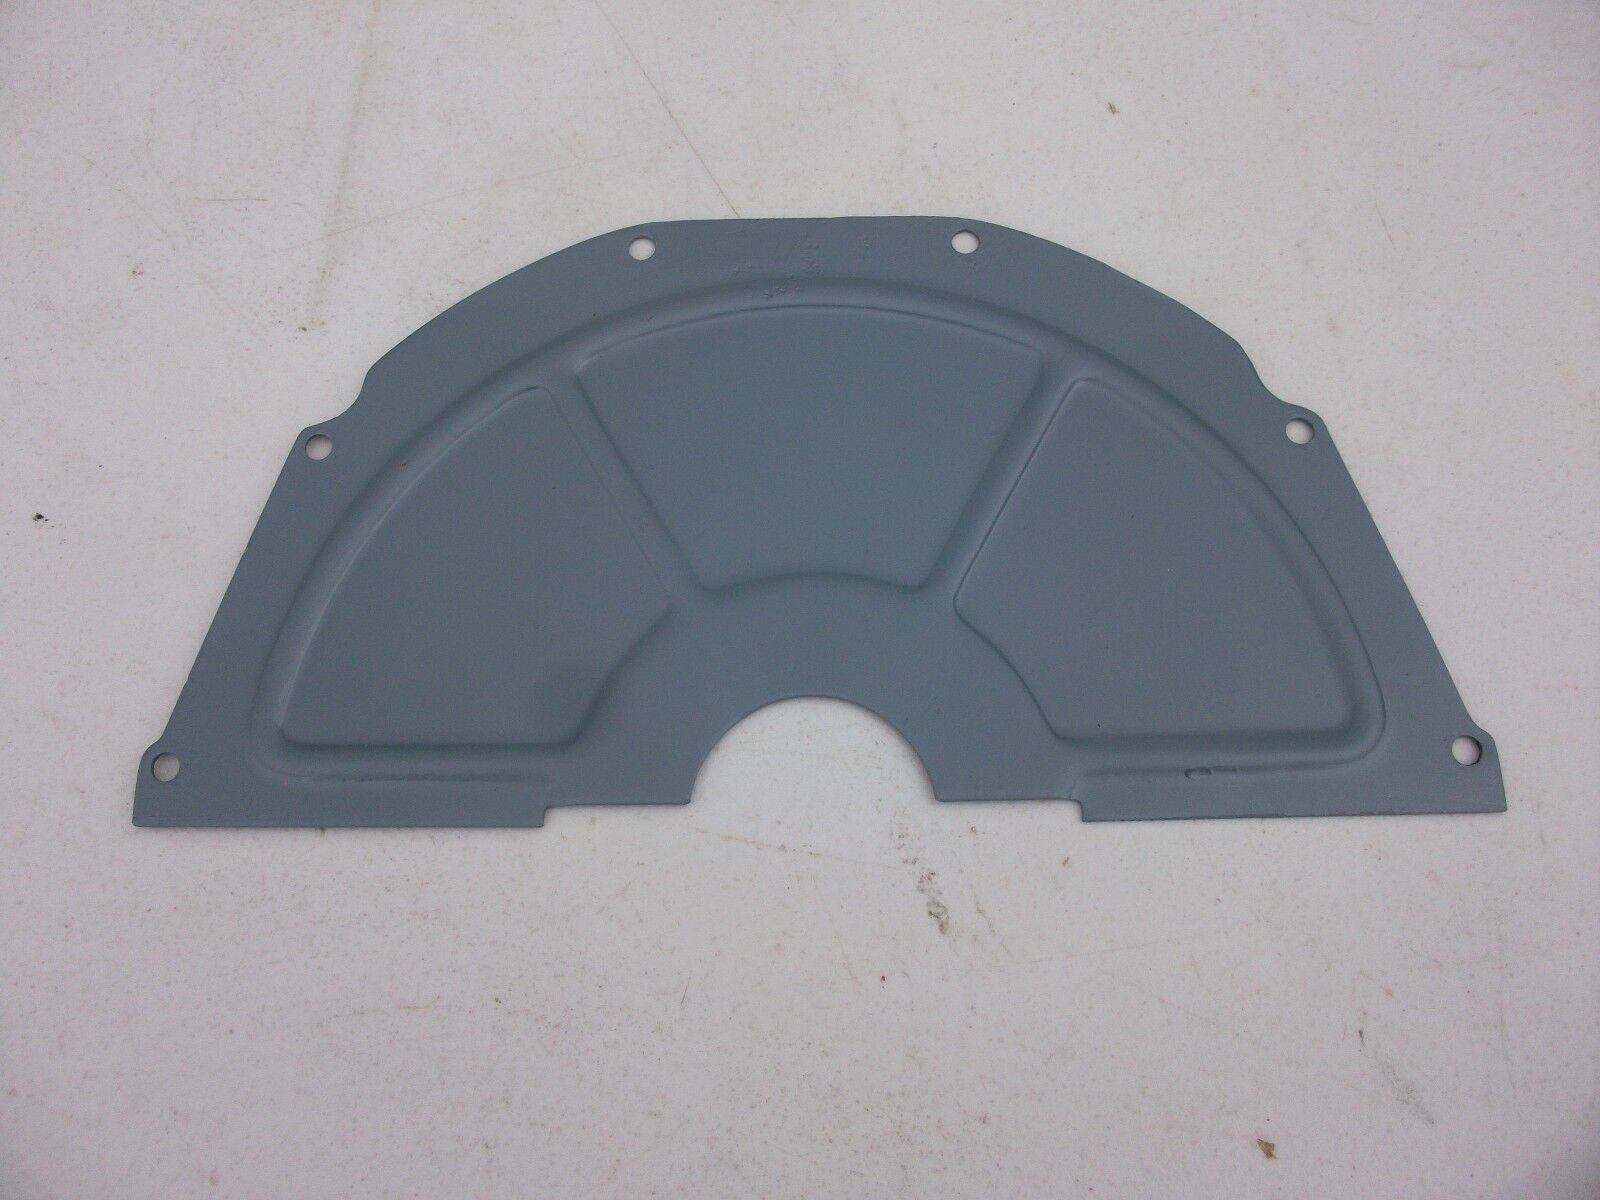 clutch inspection cover.jpg